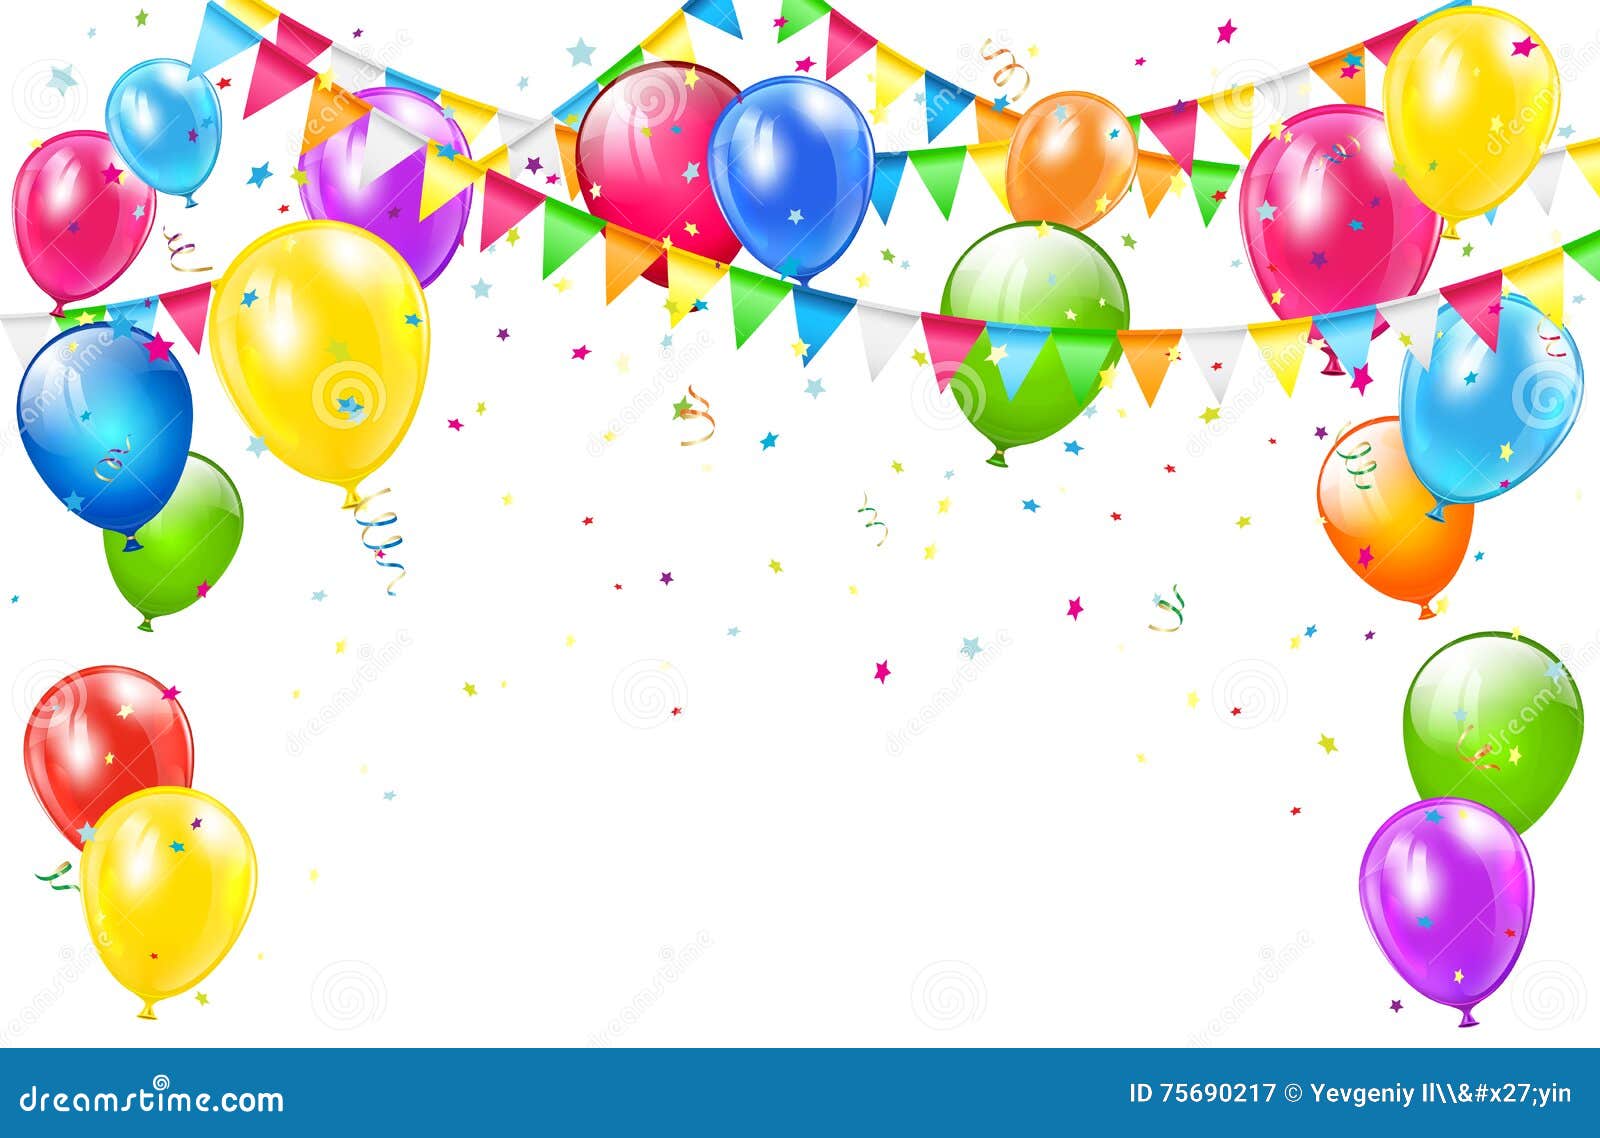 birthday background with balloons and pennants on white